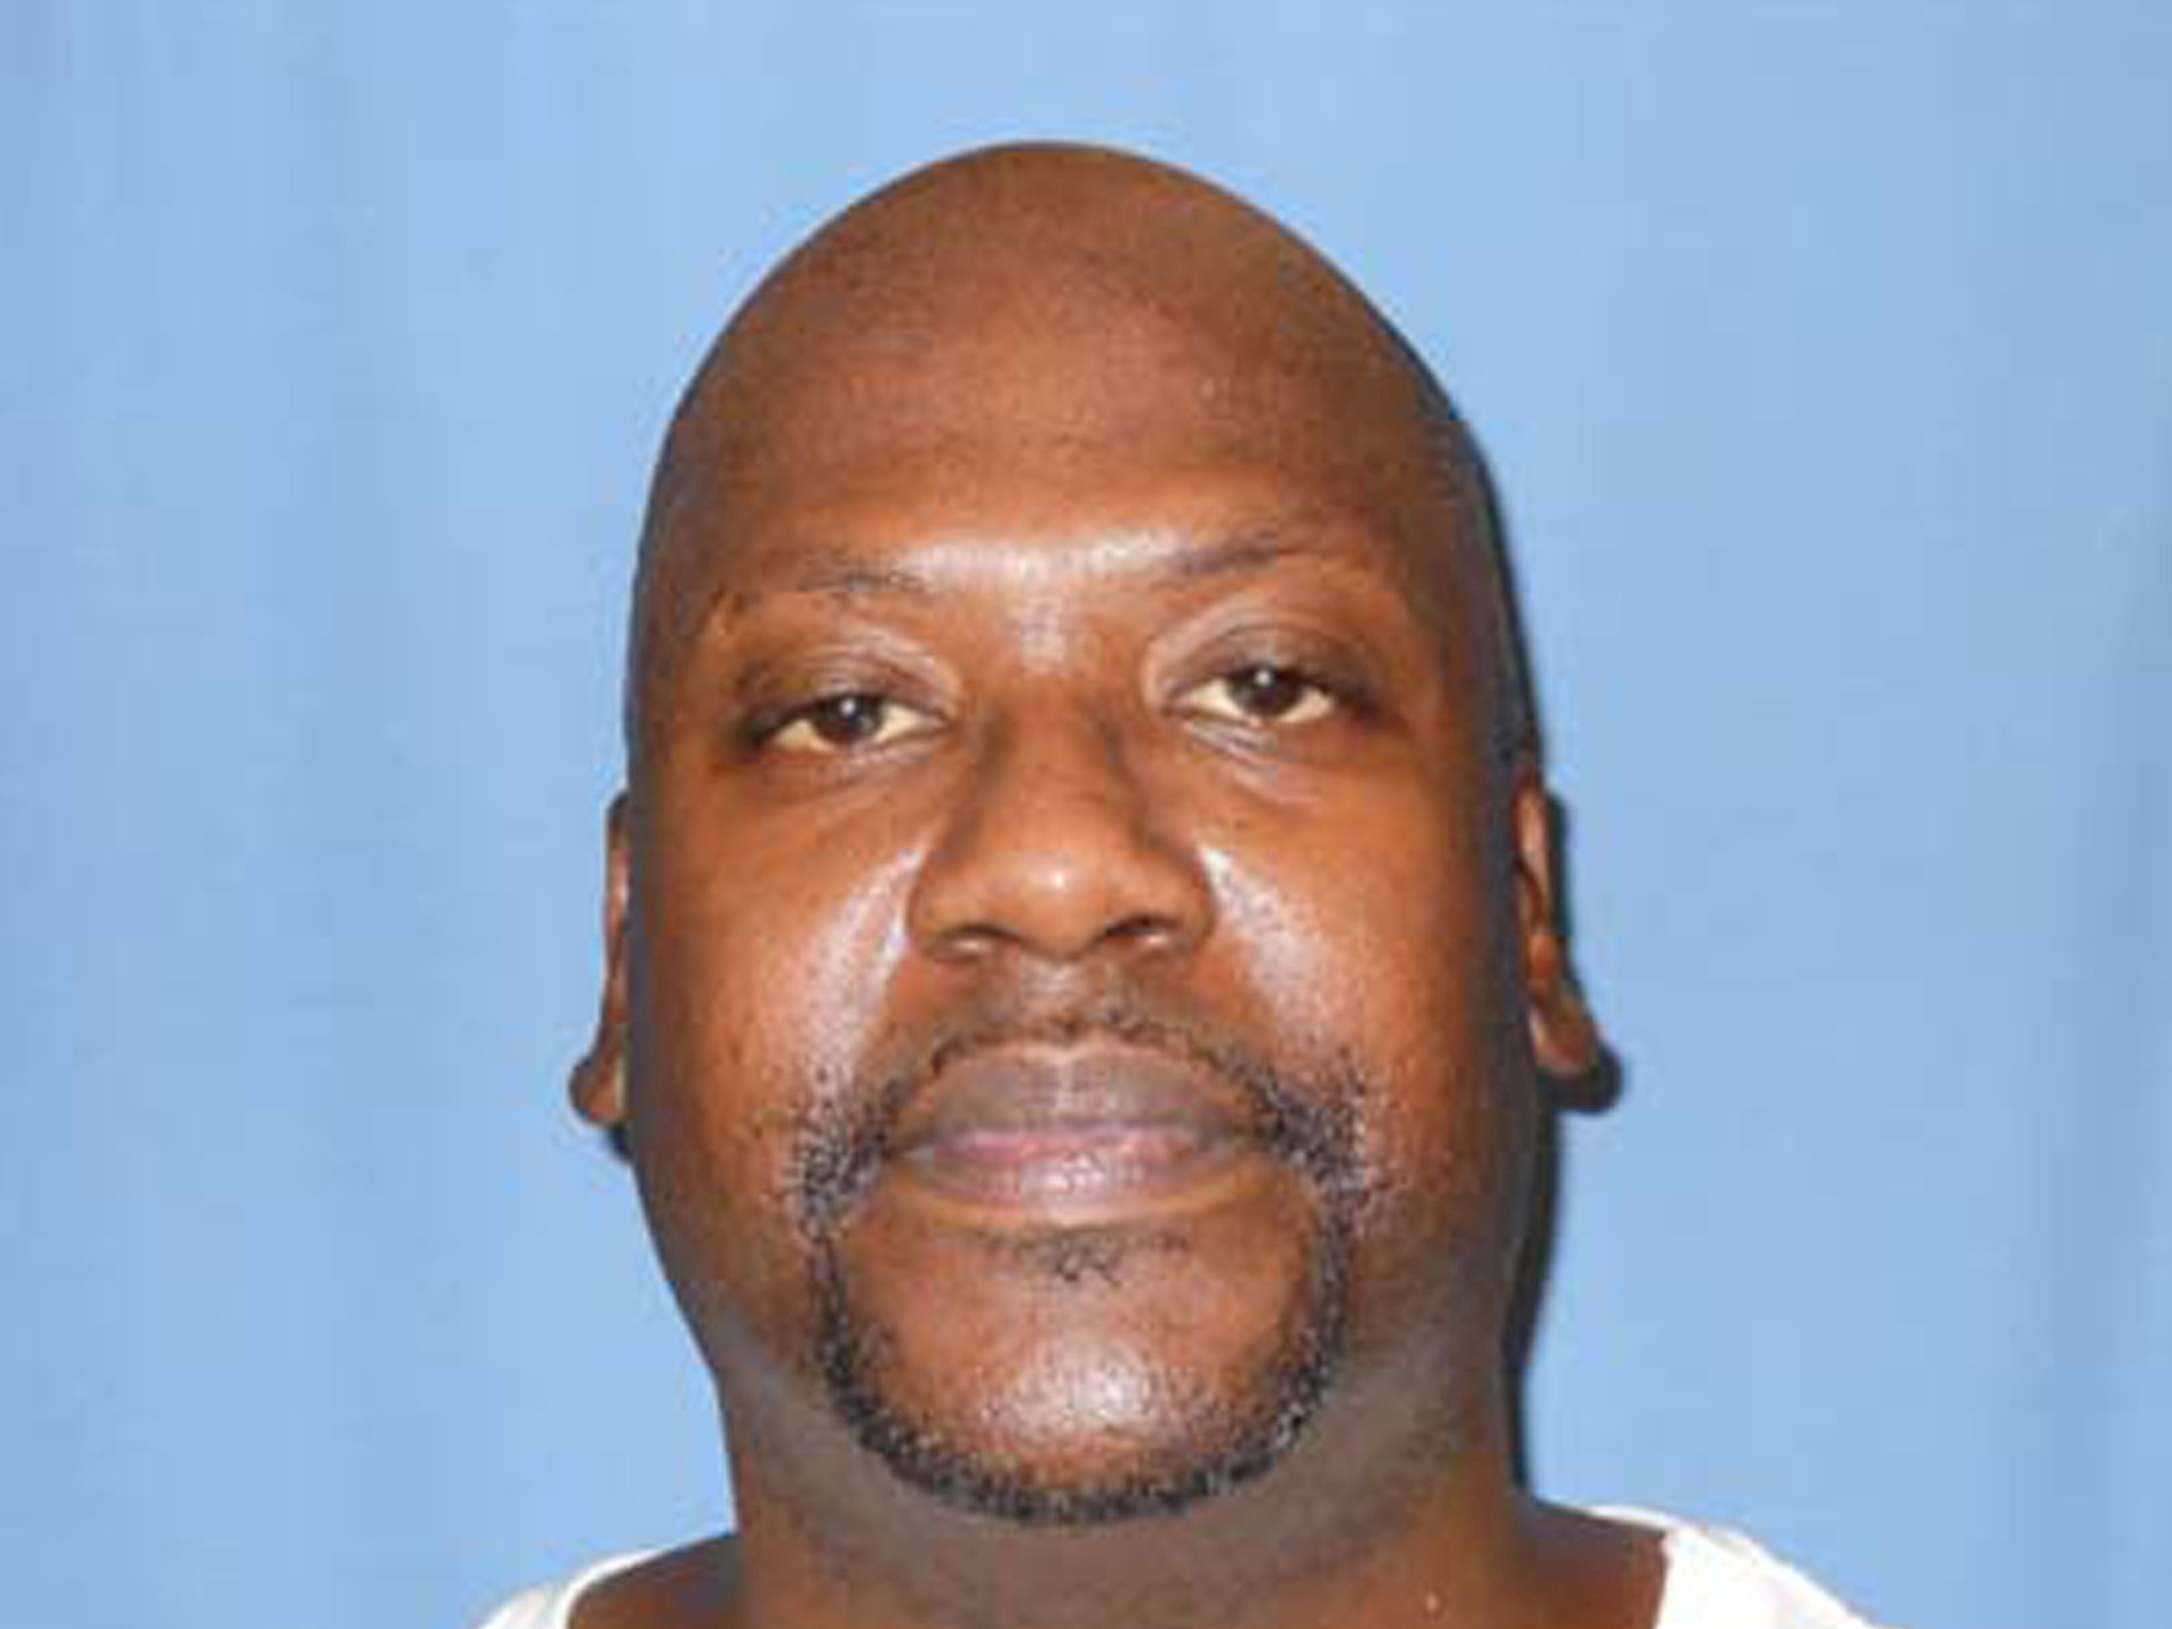 Curtis Flowers has been in jail more than 22 years